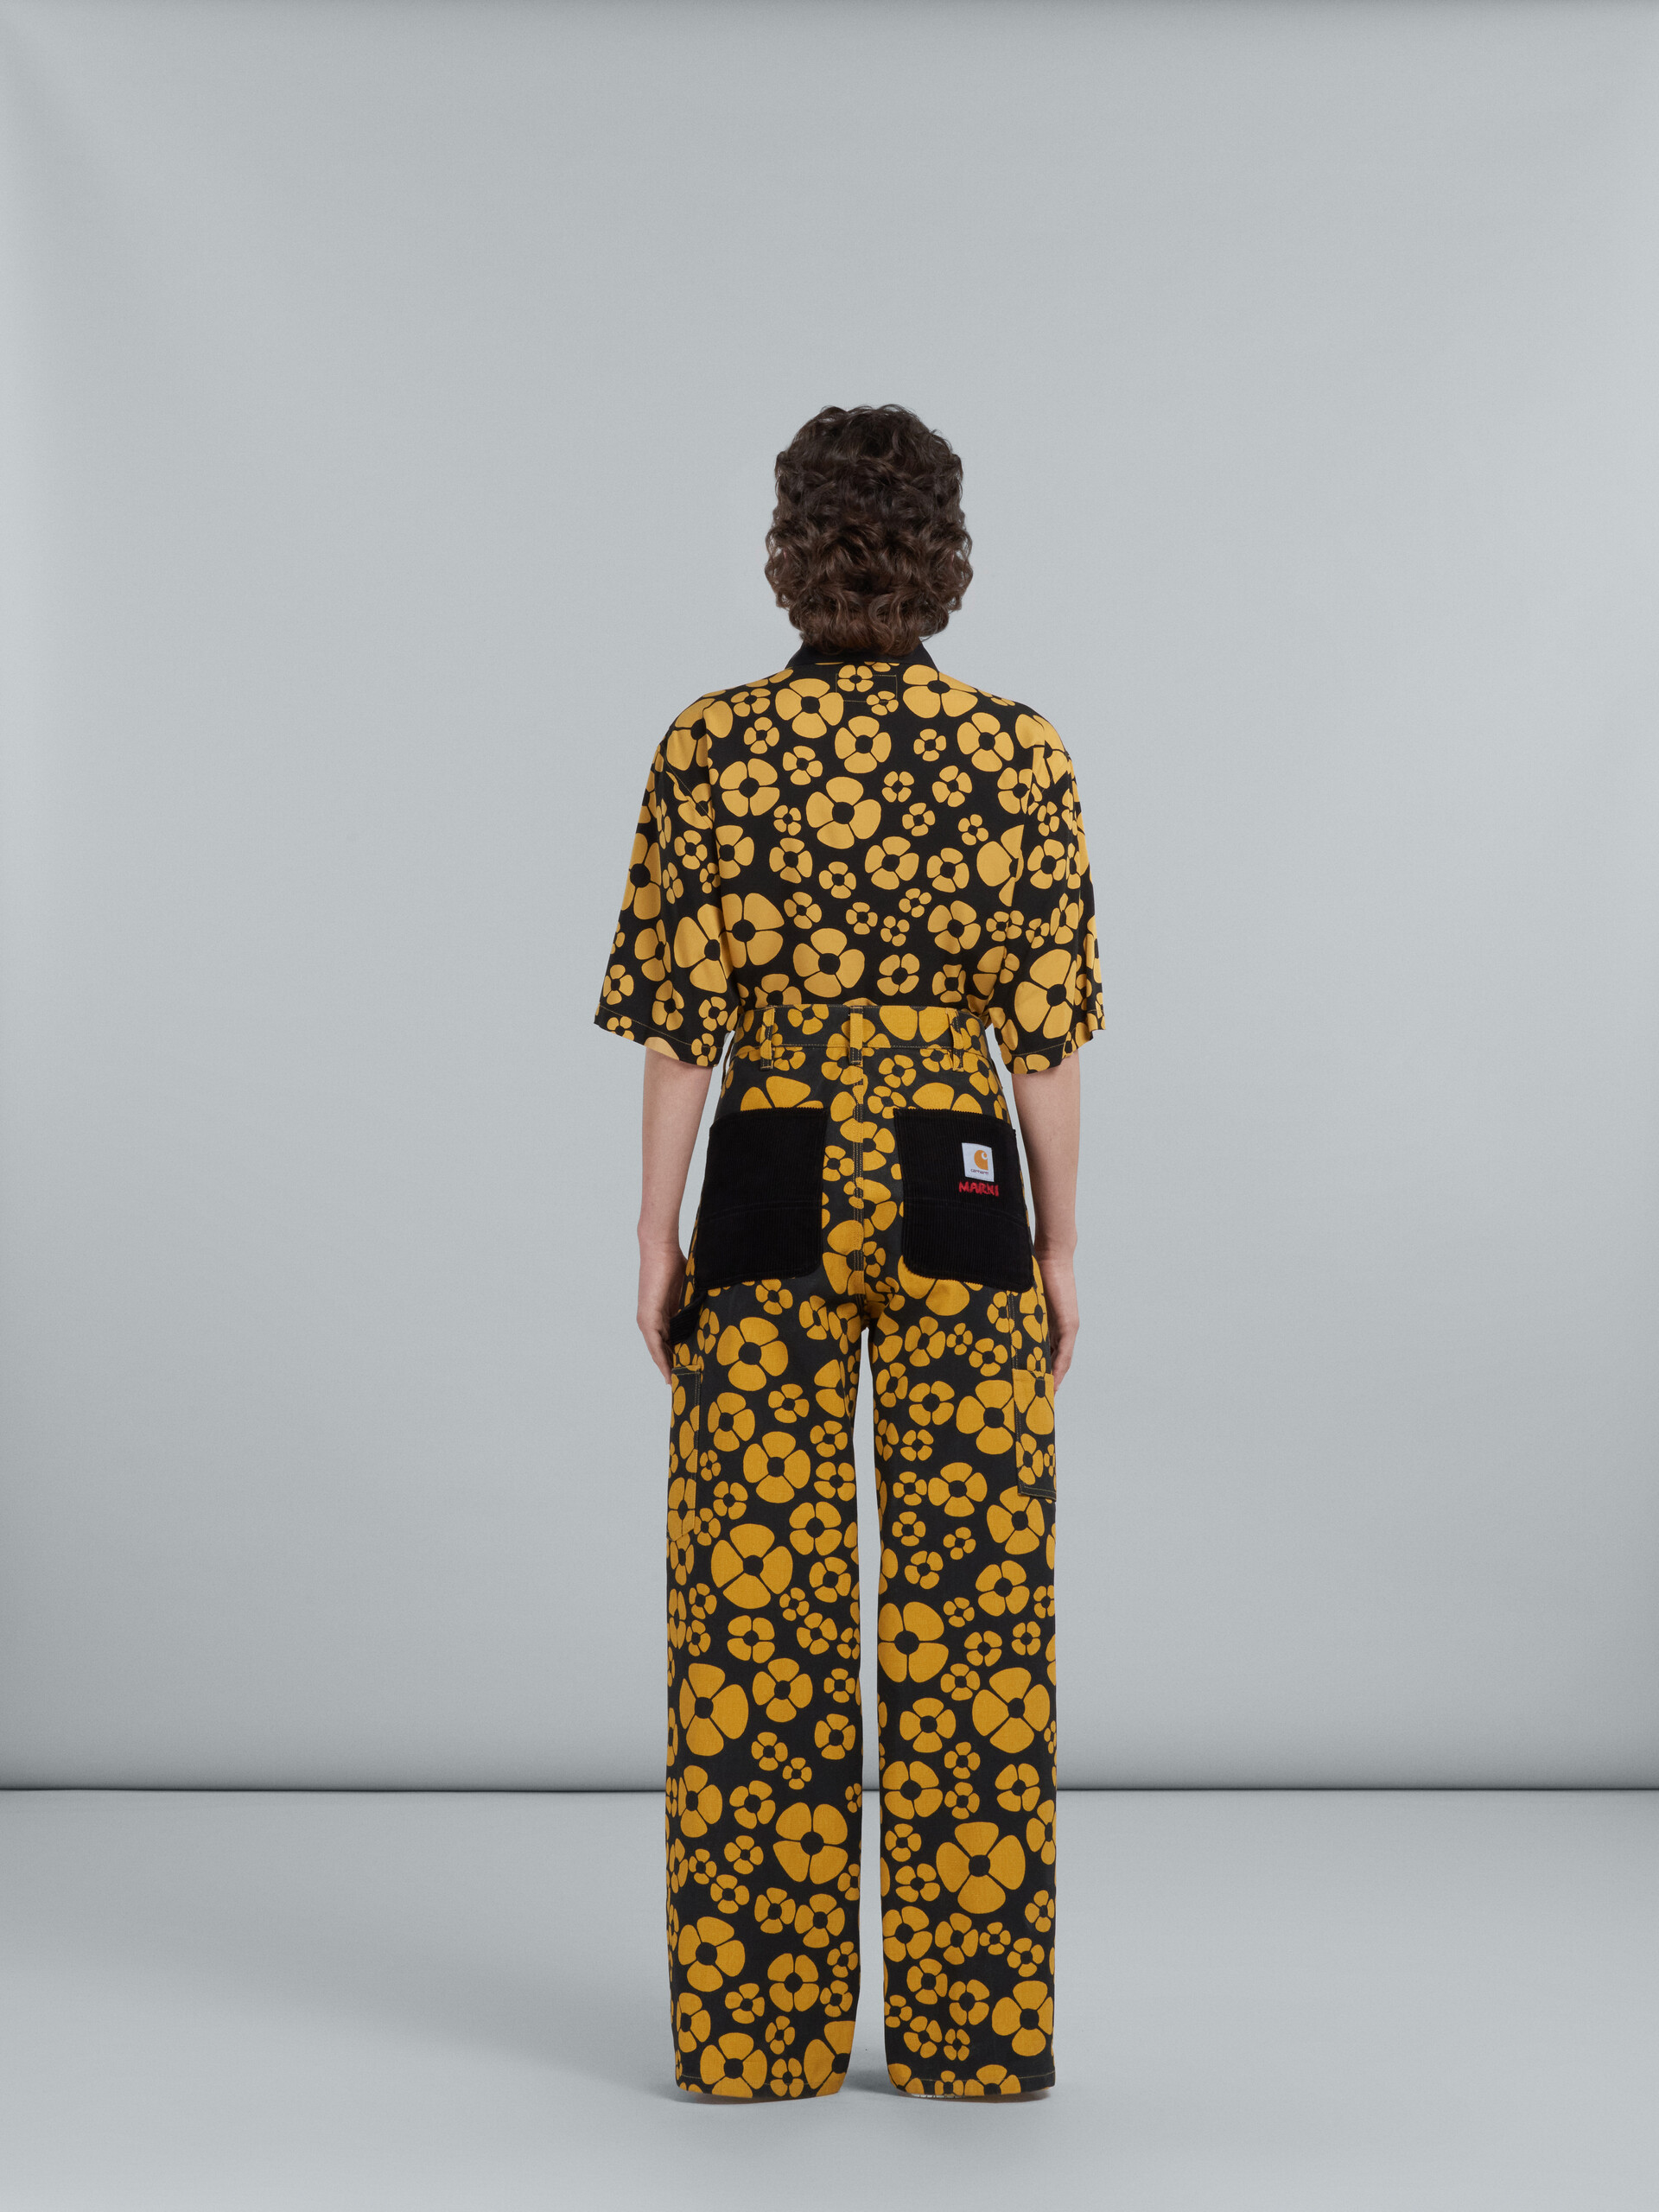 MARNI x CARHARTT WIP - yellow floral trousers - Pants - Image 3